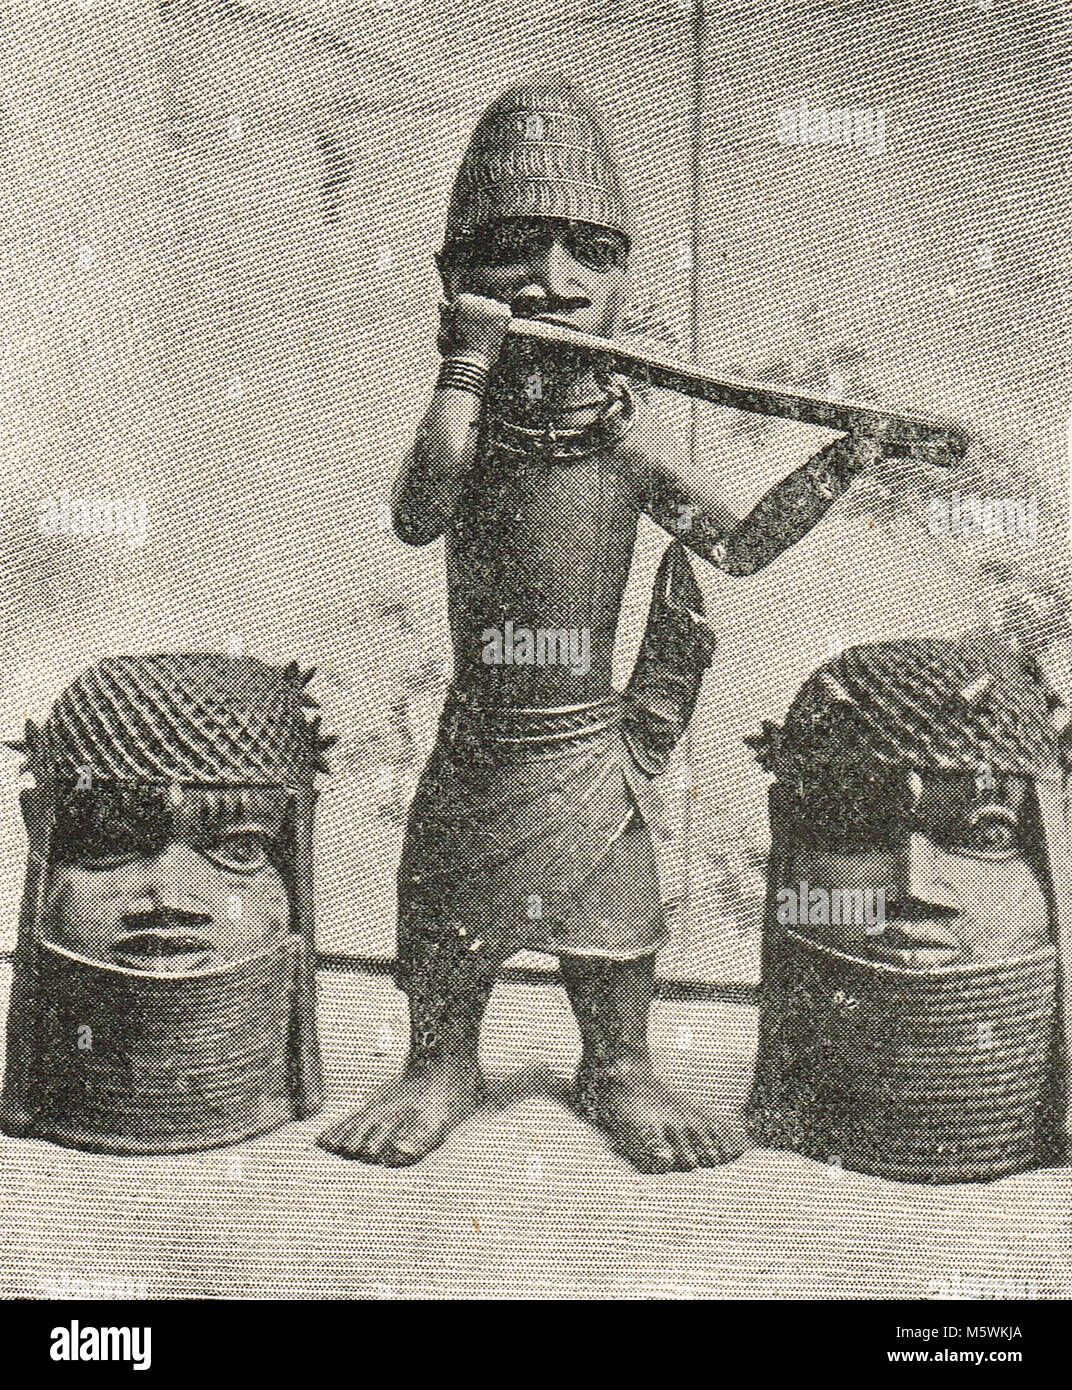 Curios from the Benin Expedition of 1897, removed by the British from royal palace of the Benin Kingdom (Modern-day Nigeria) Stock Photo